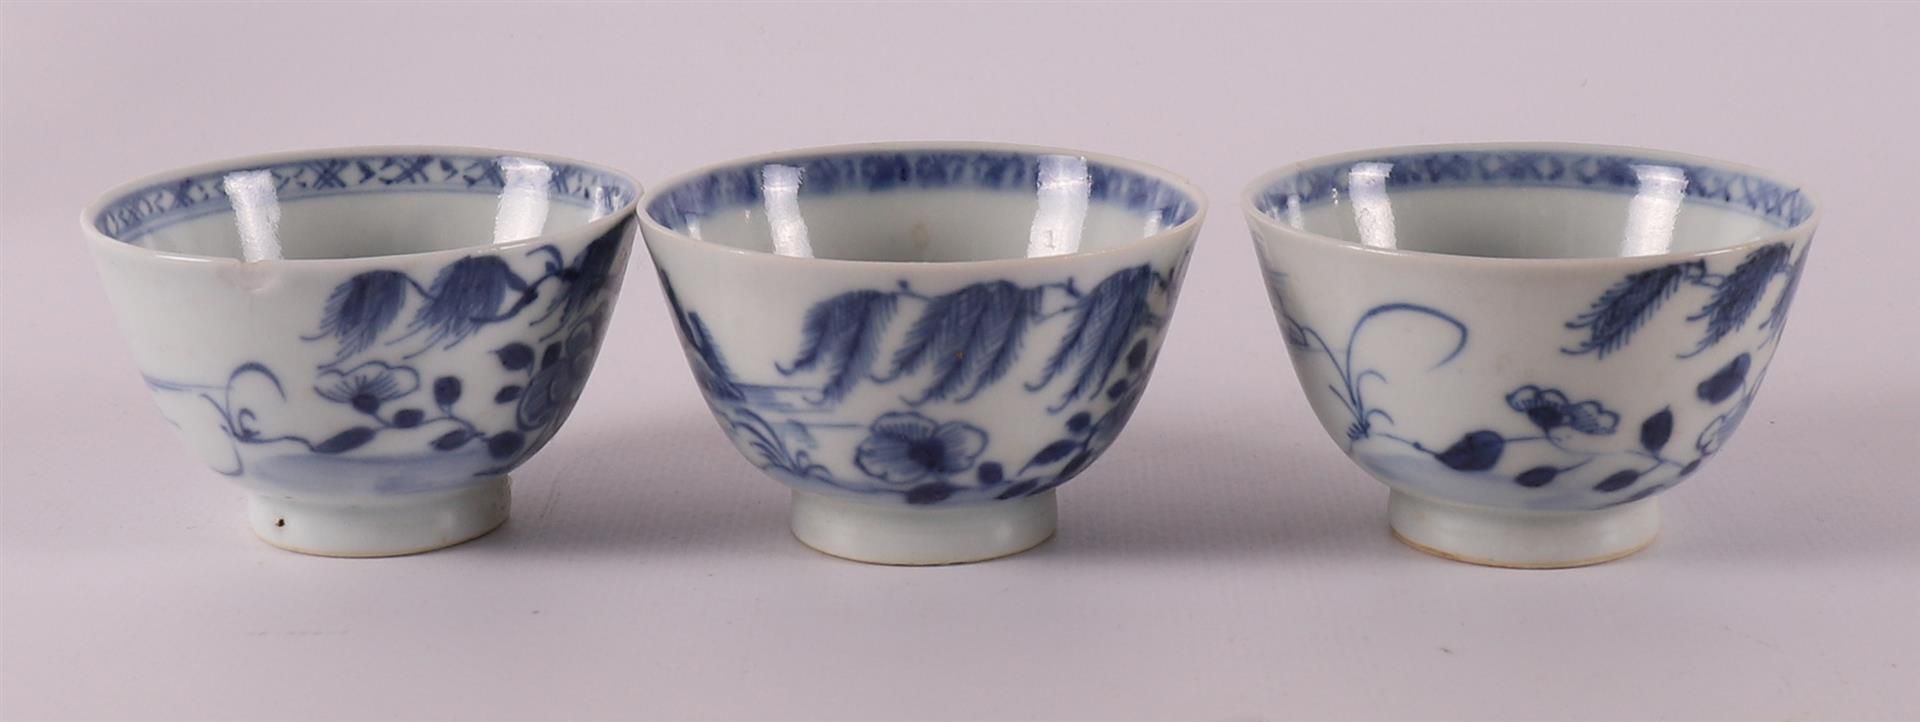 Six blue/white porcelain cups and four saucers, China, Qianlong, 18th century. - Image 18 of 21